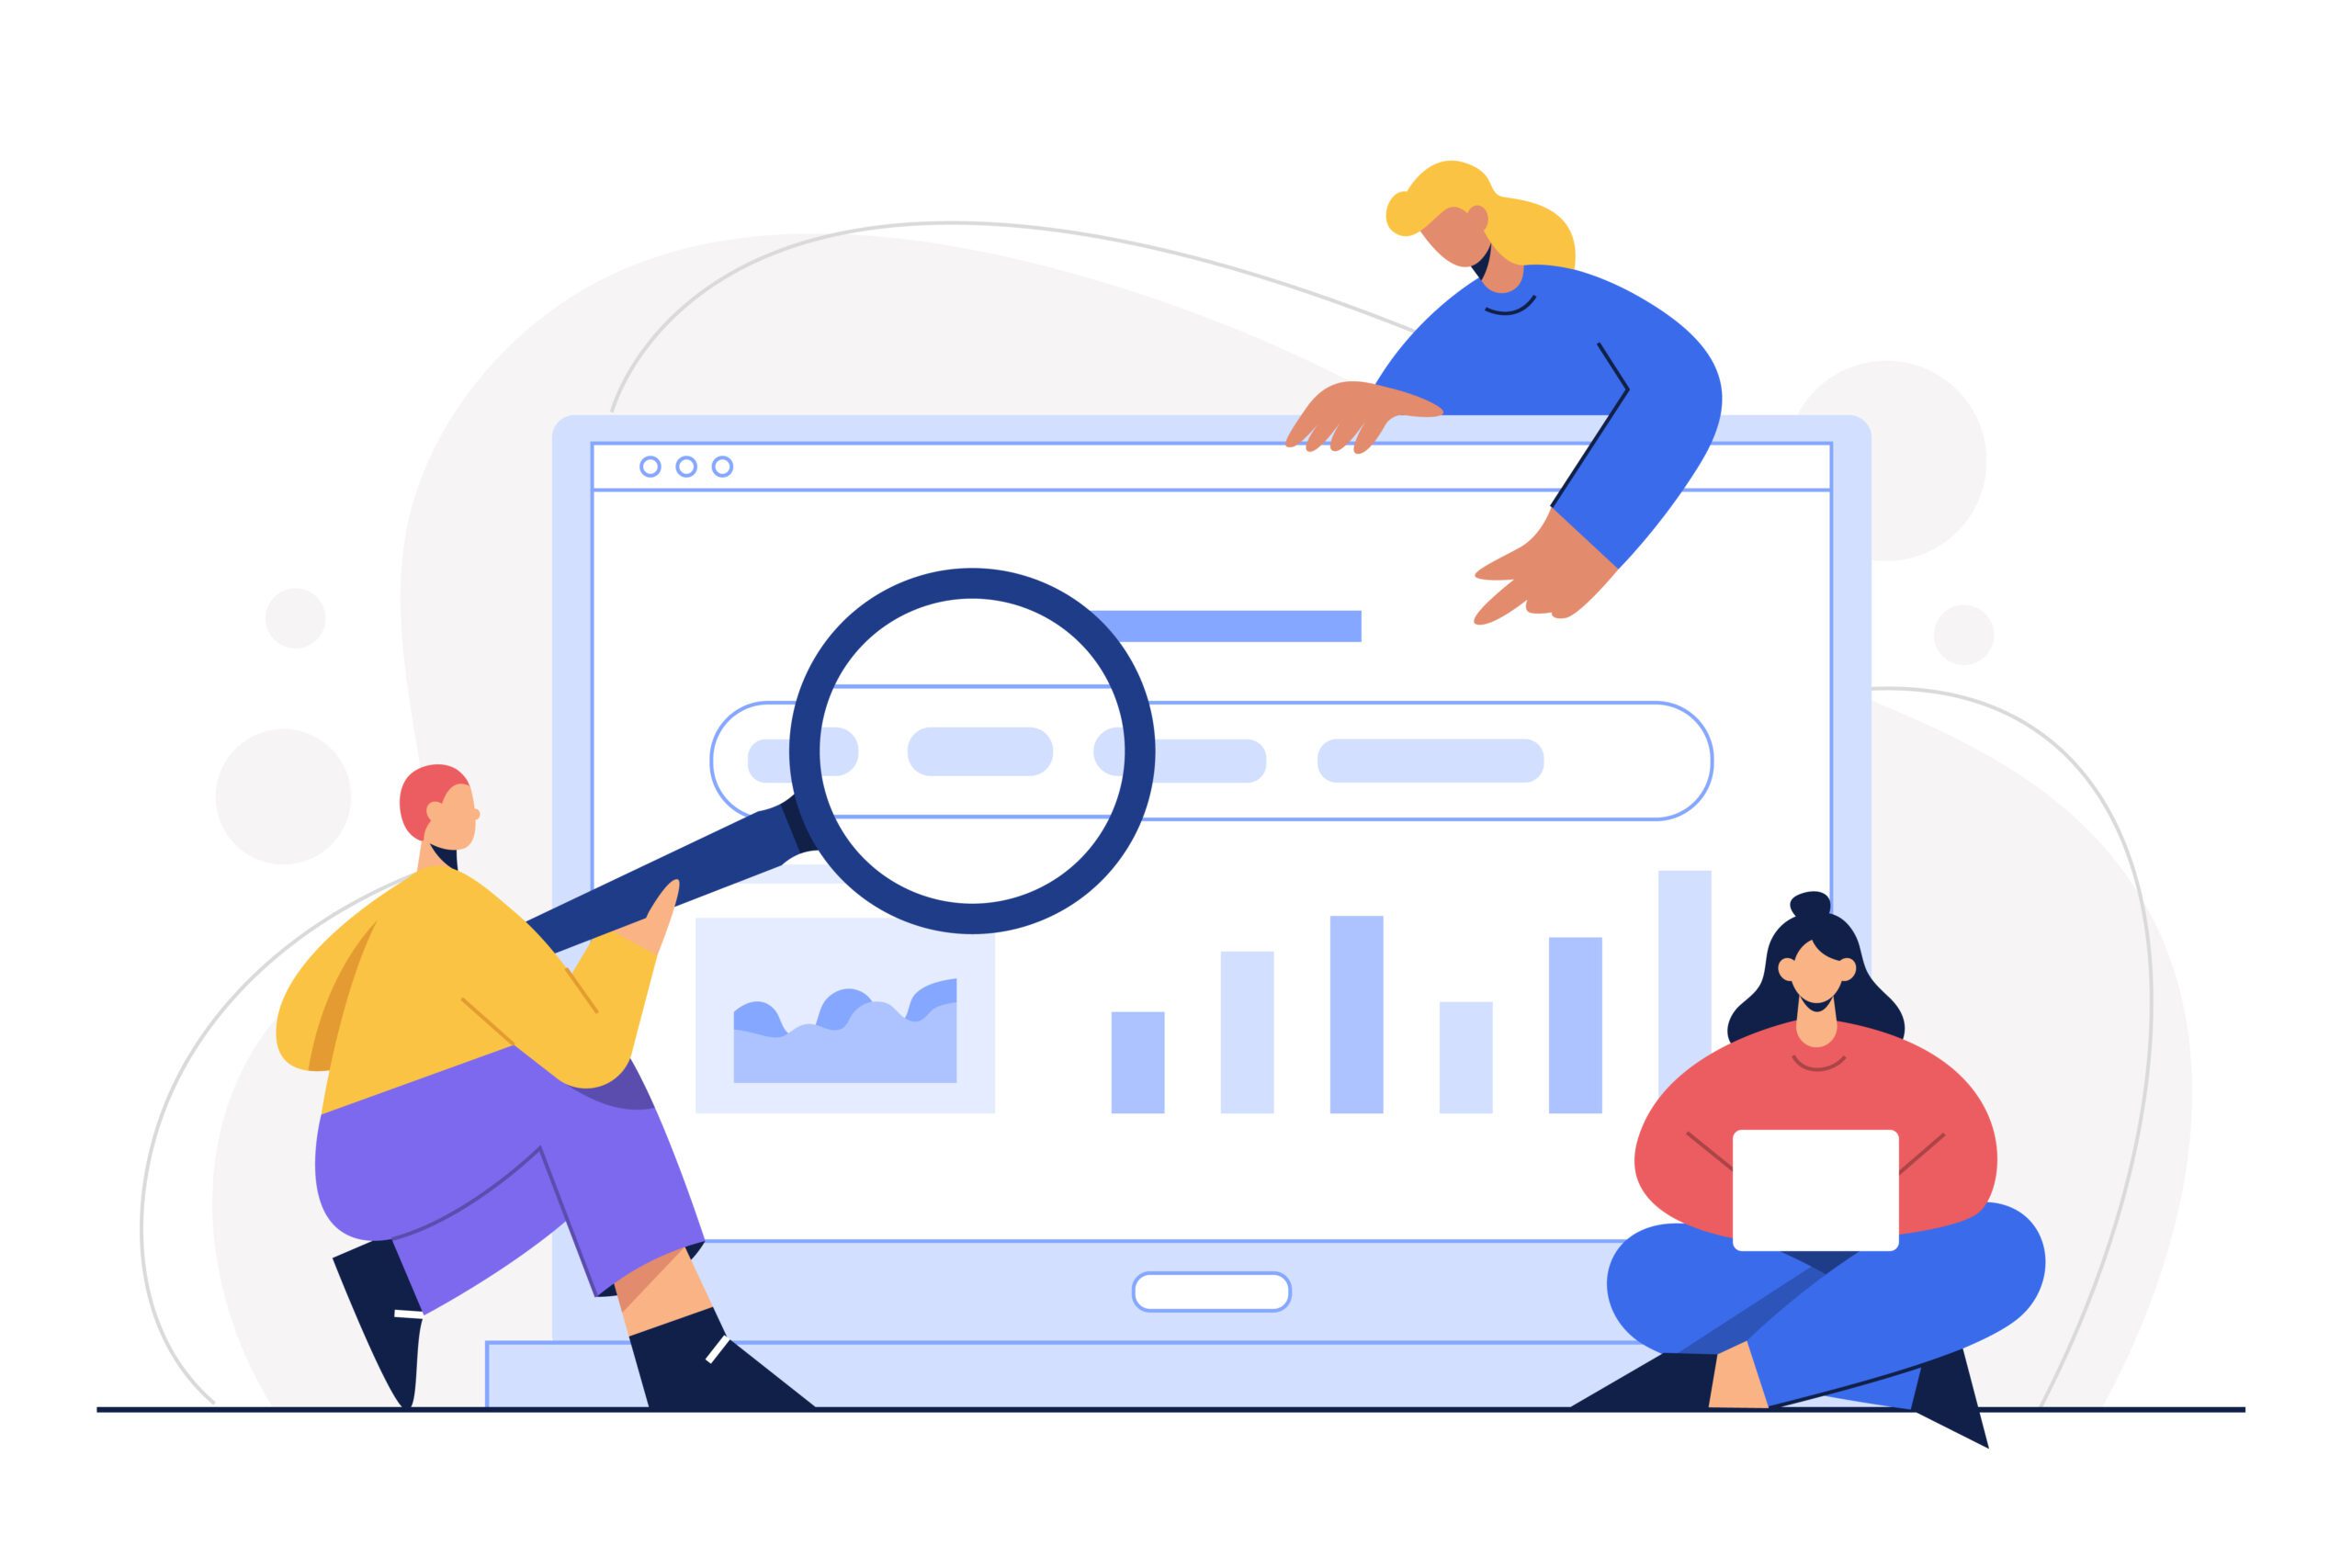 paid search monitoring